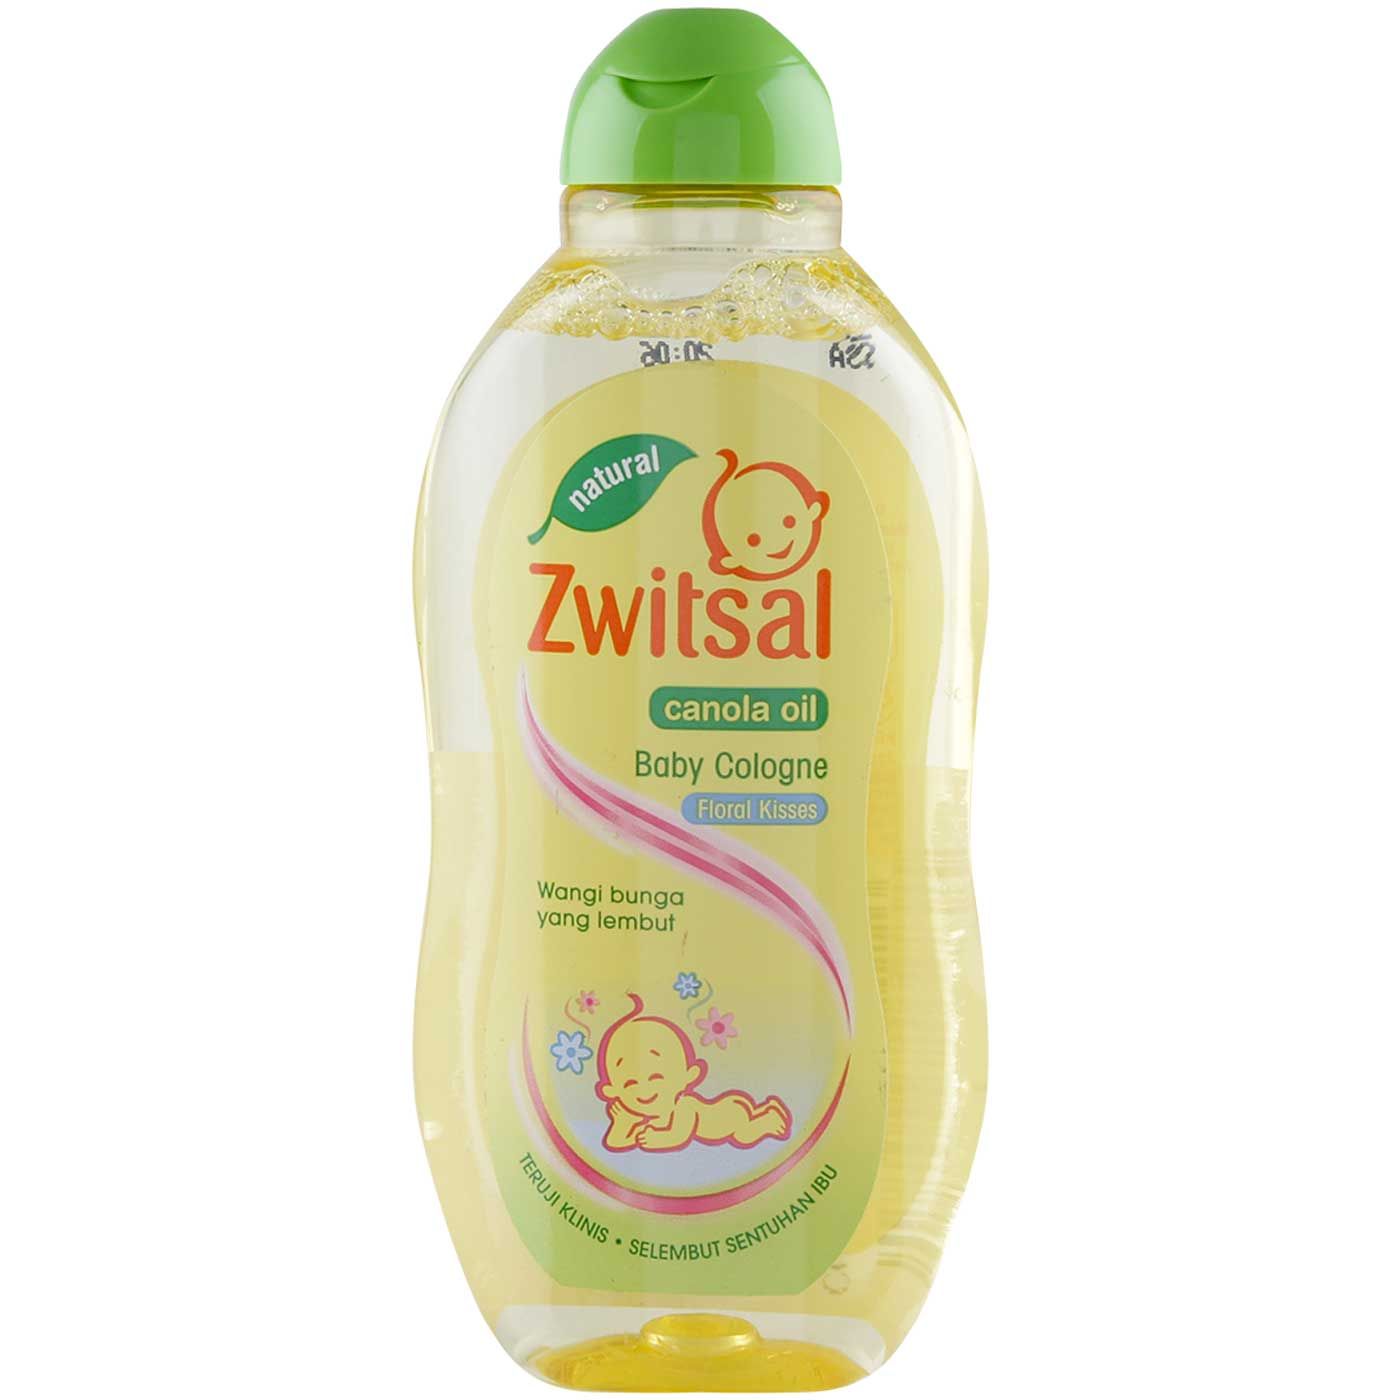 Zwitsal Baby Cologne Floral Kisses 100ml - 1